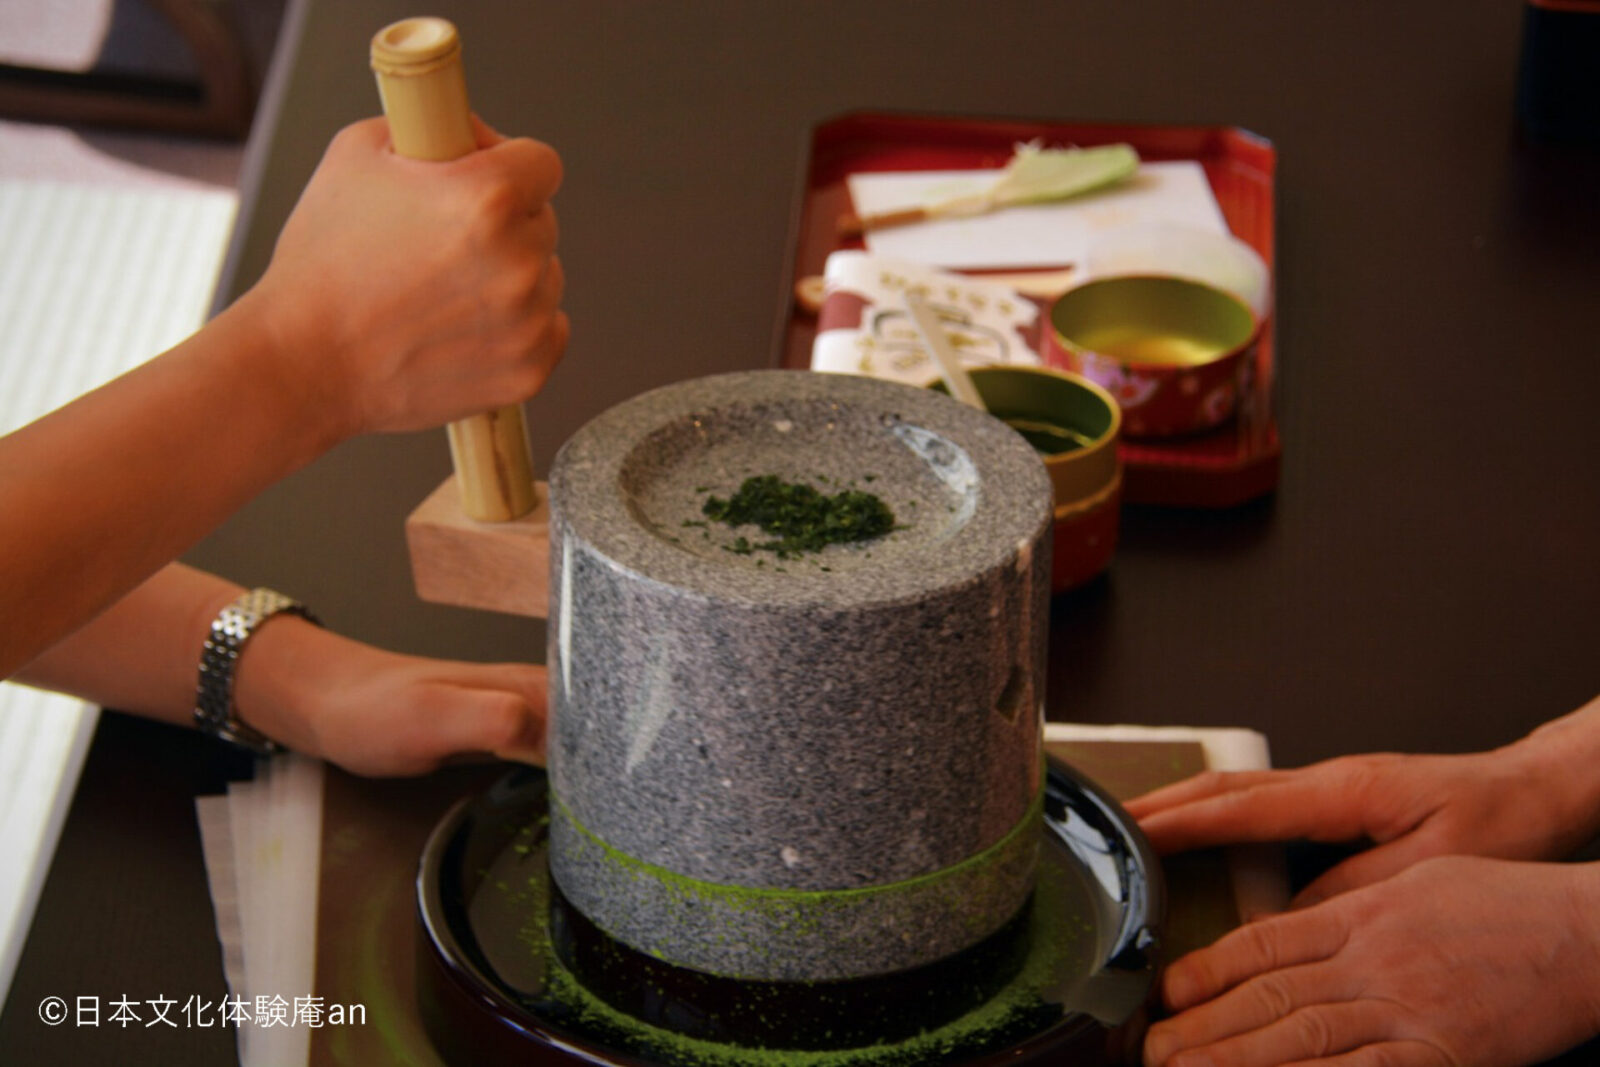 Japanese Traditional Sweets making and Tea Ceremony (2 kinds of experiences) 画像3